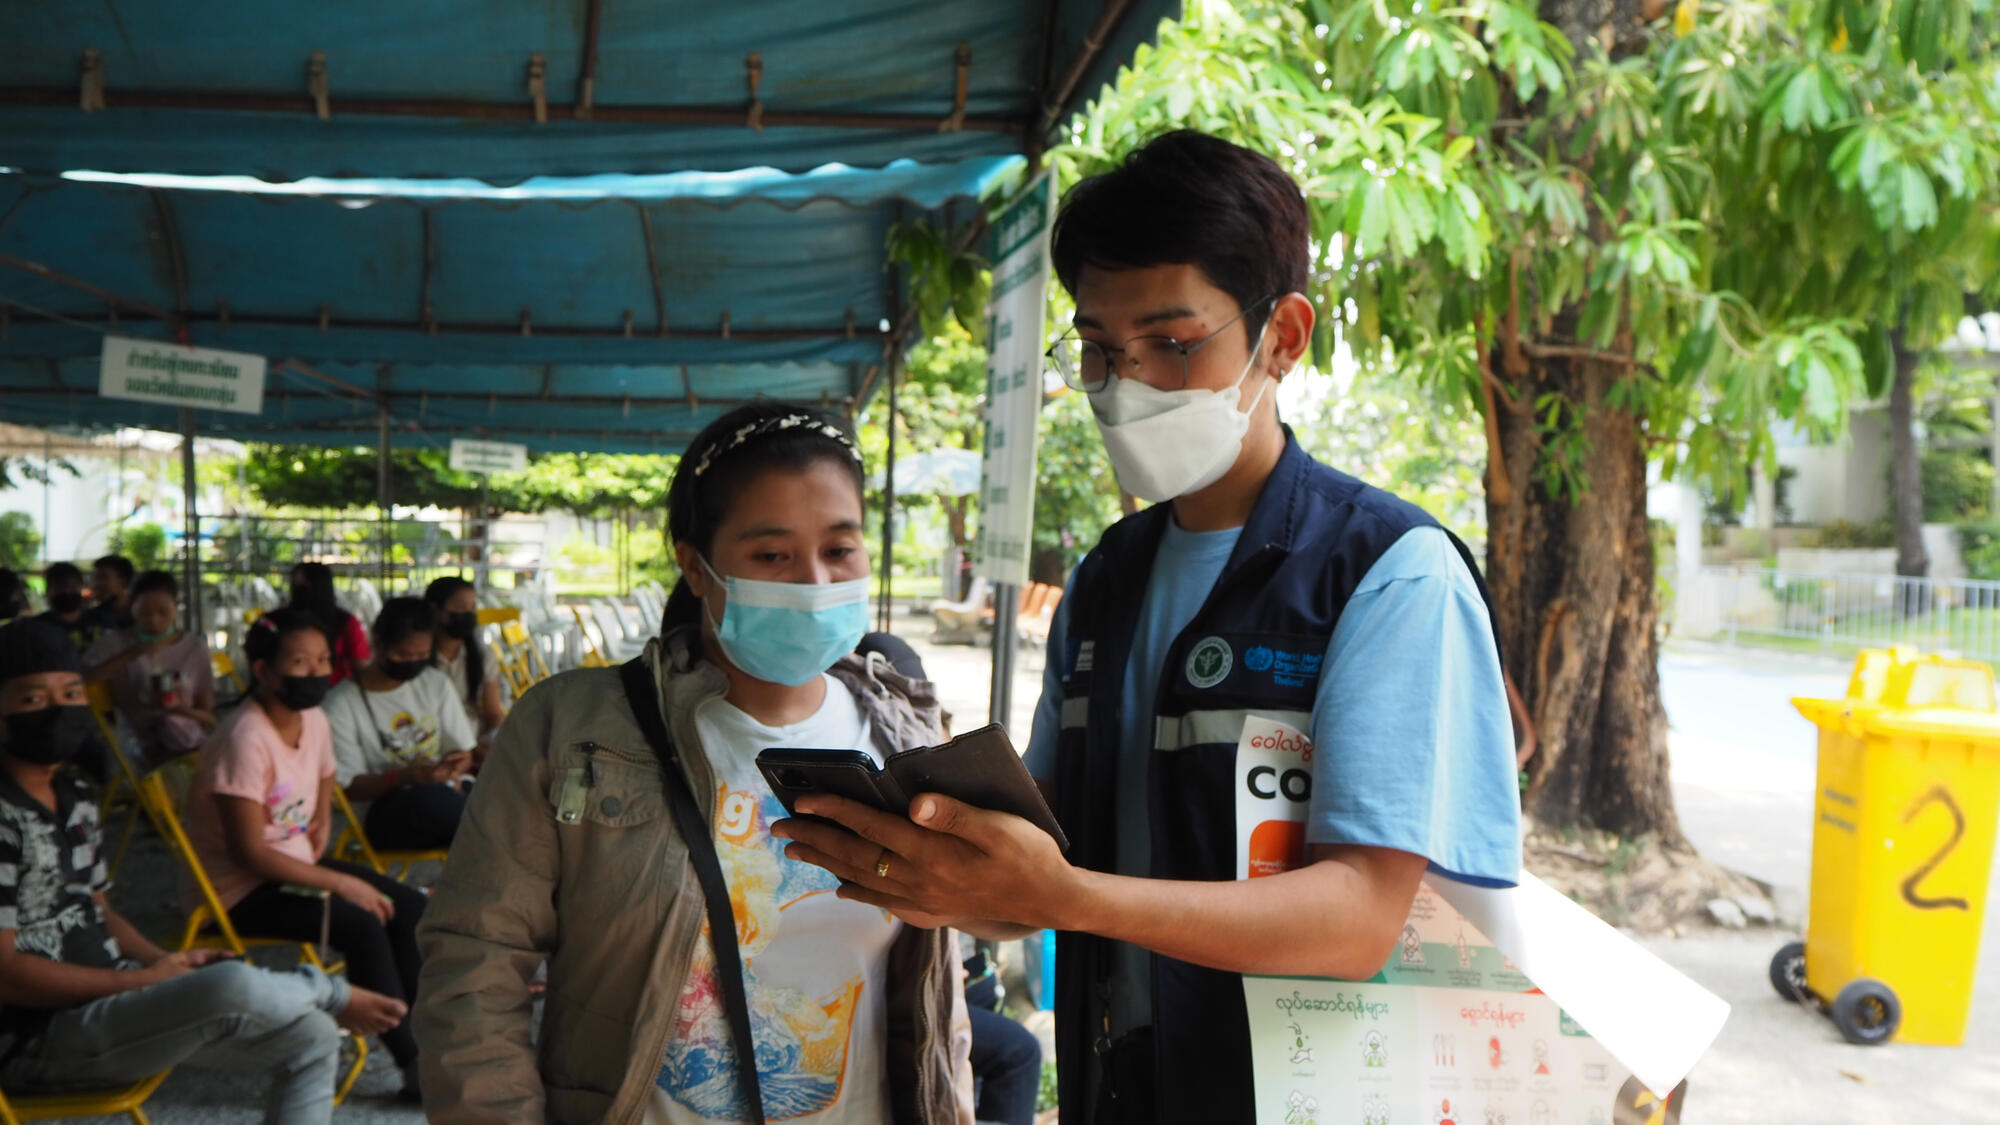 Min Yar Zar, a Myanmar migrant health volunteer in the Bangkok – Samut Prakan area, is providing COVID-19 knowledge and a correct understanding of the vaccine.